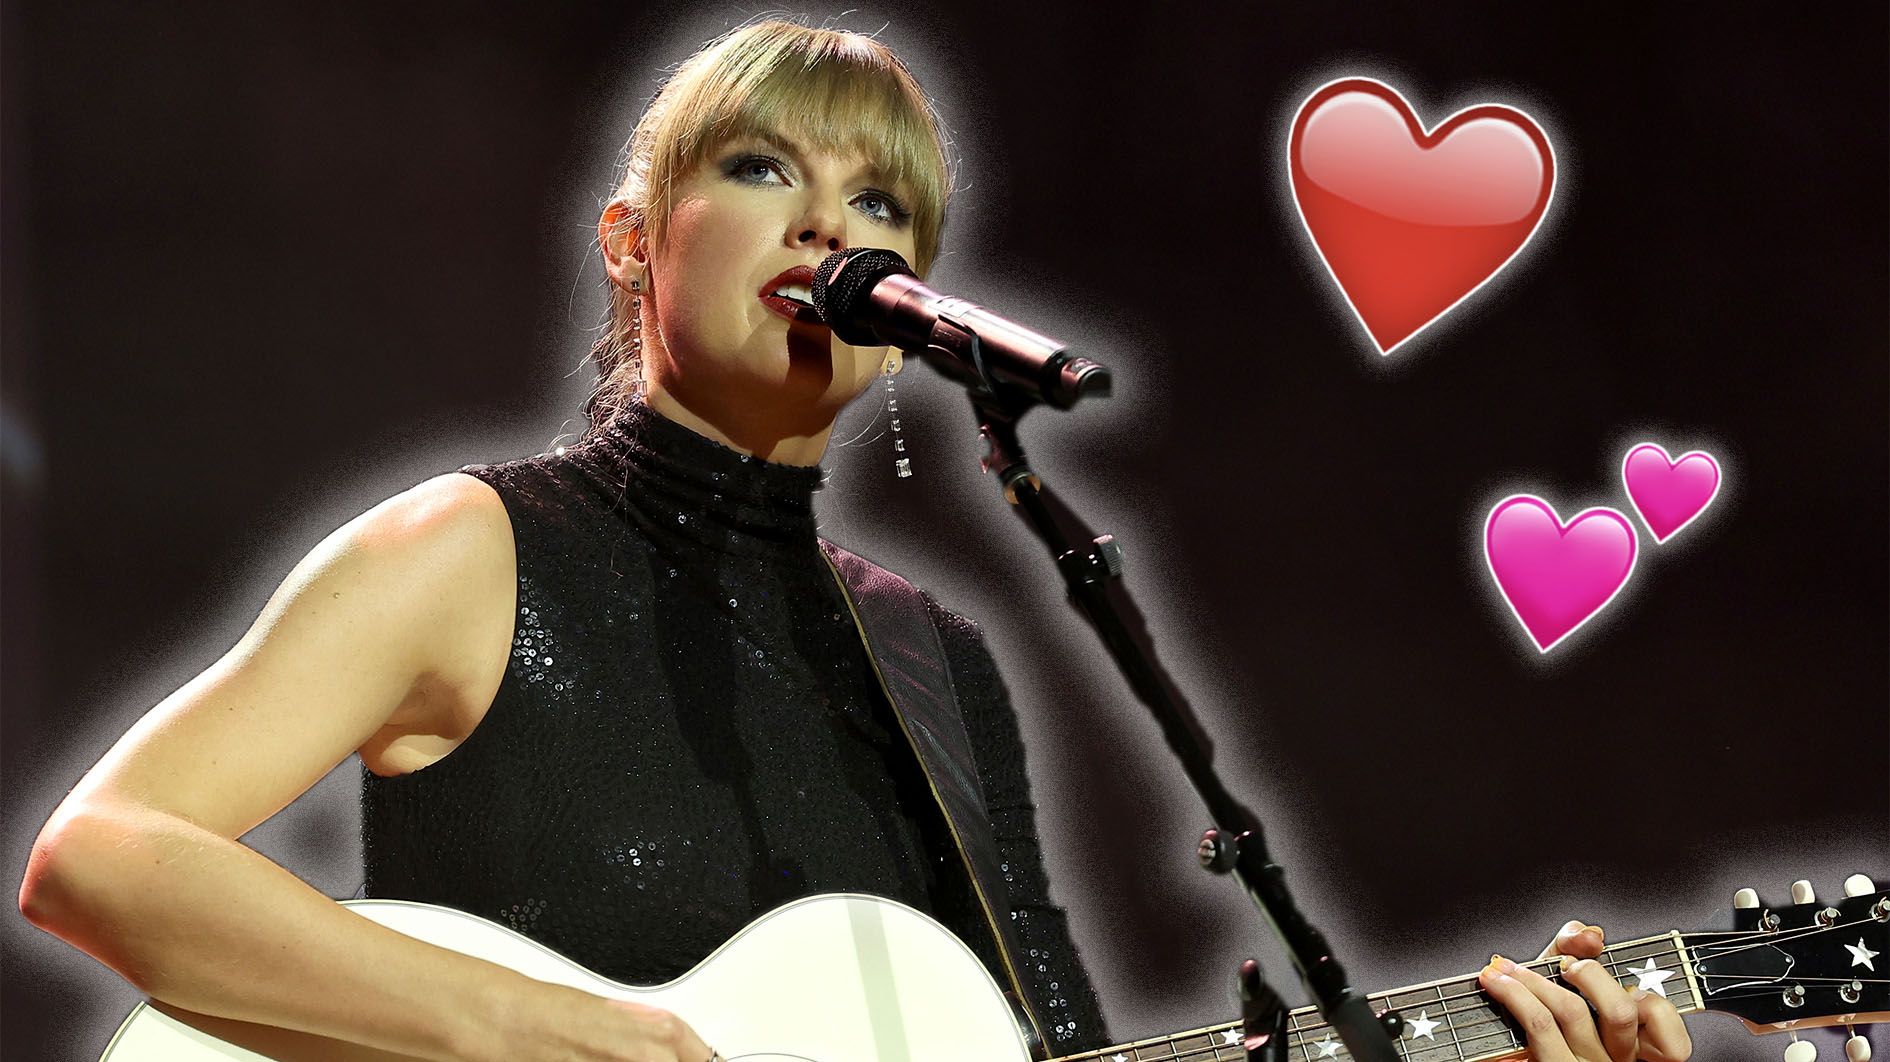 Who Are Taylor Swift's Songs About?